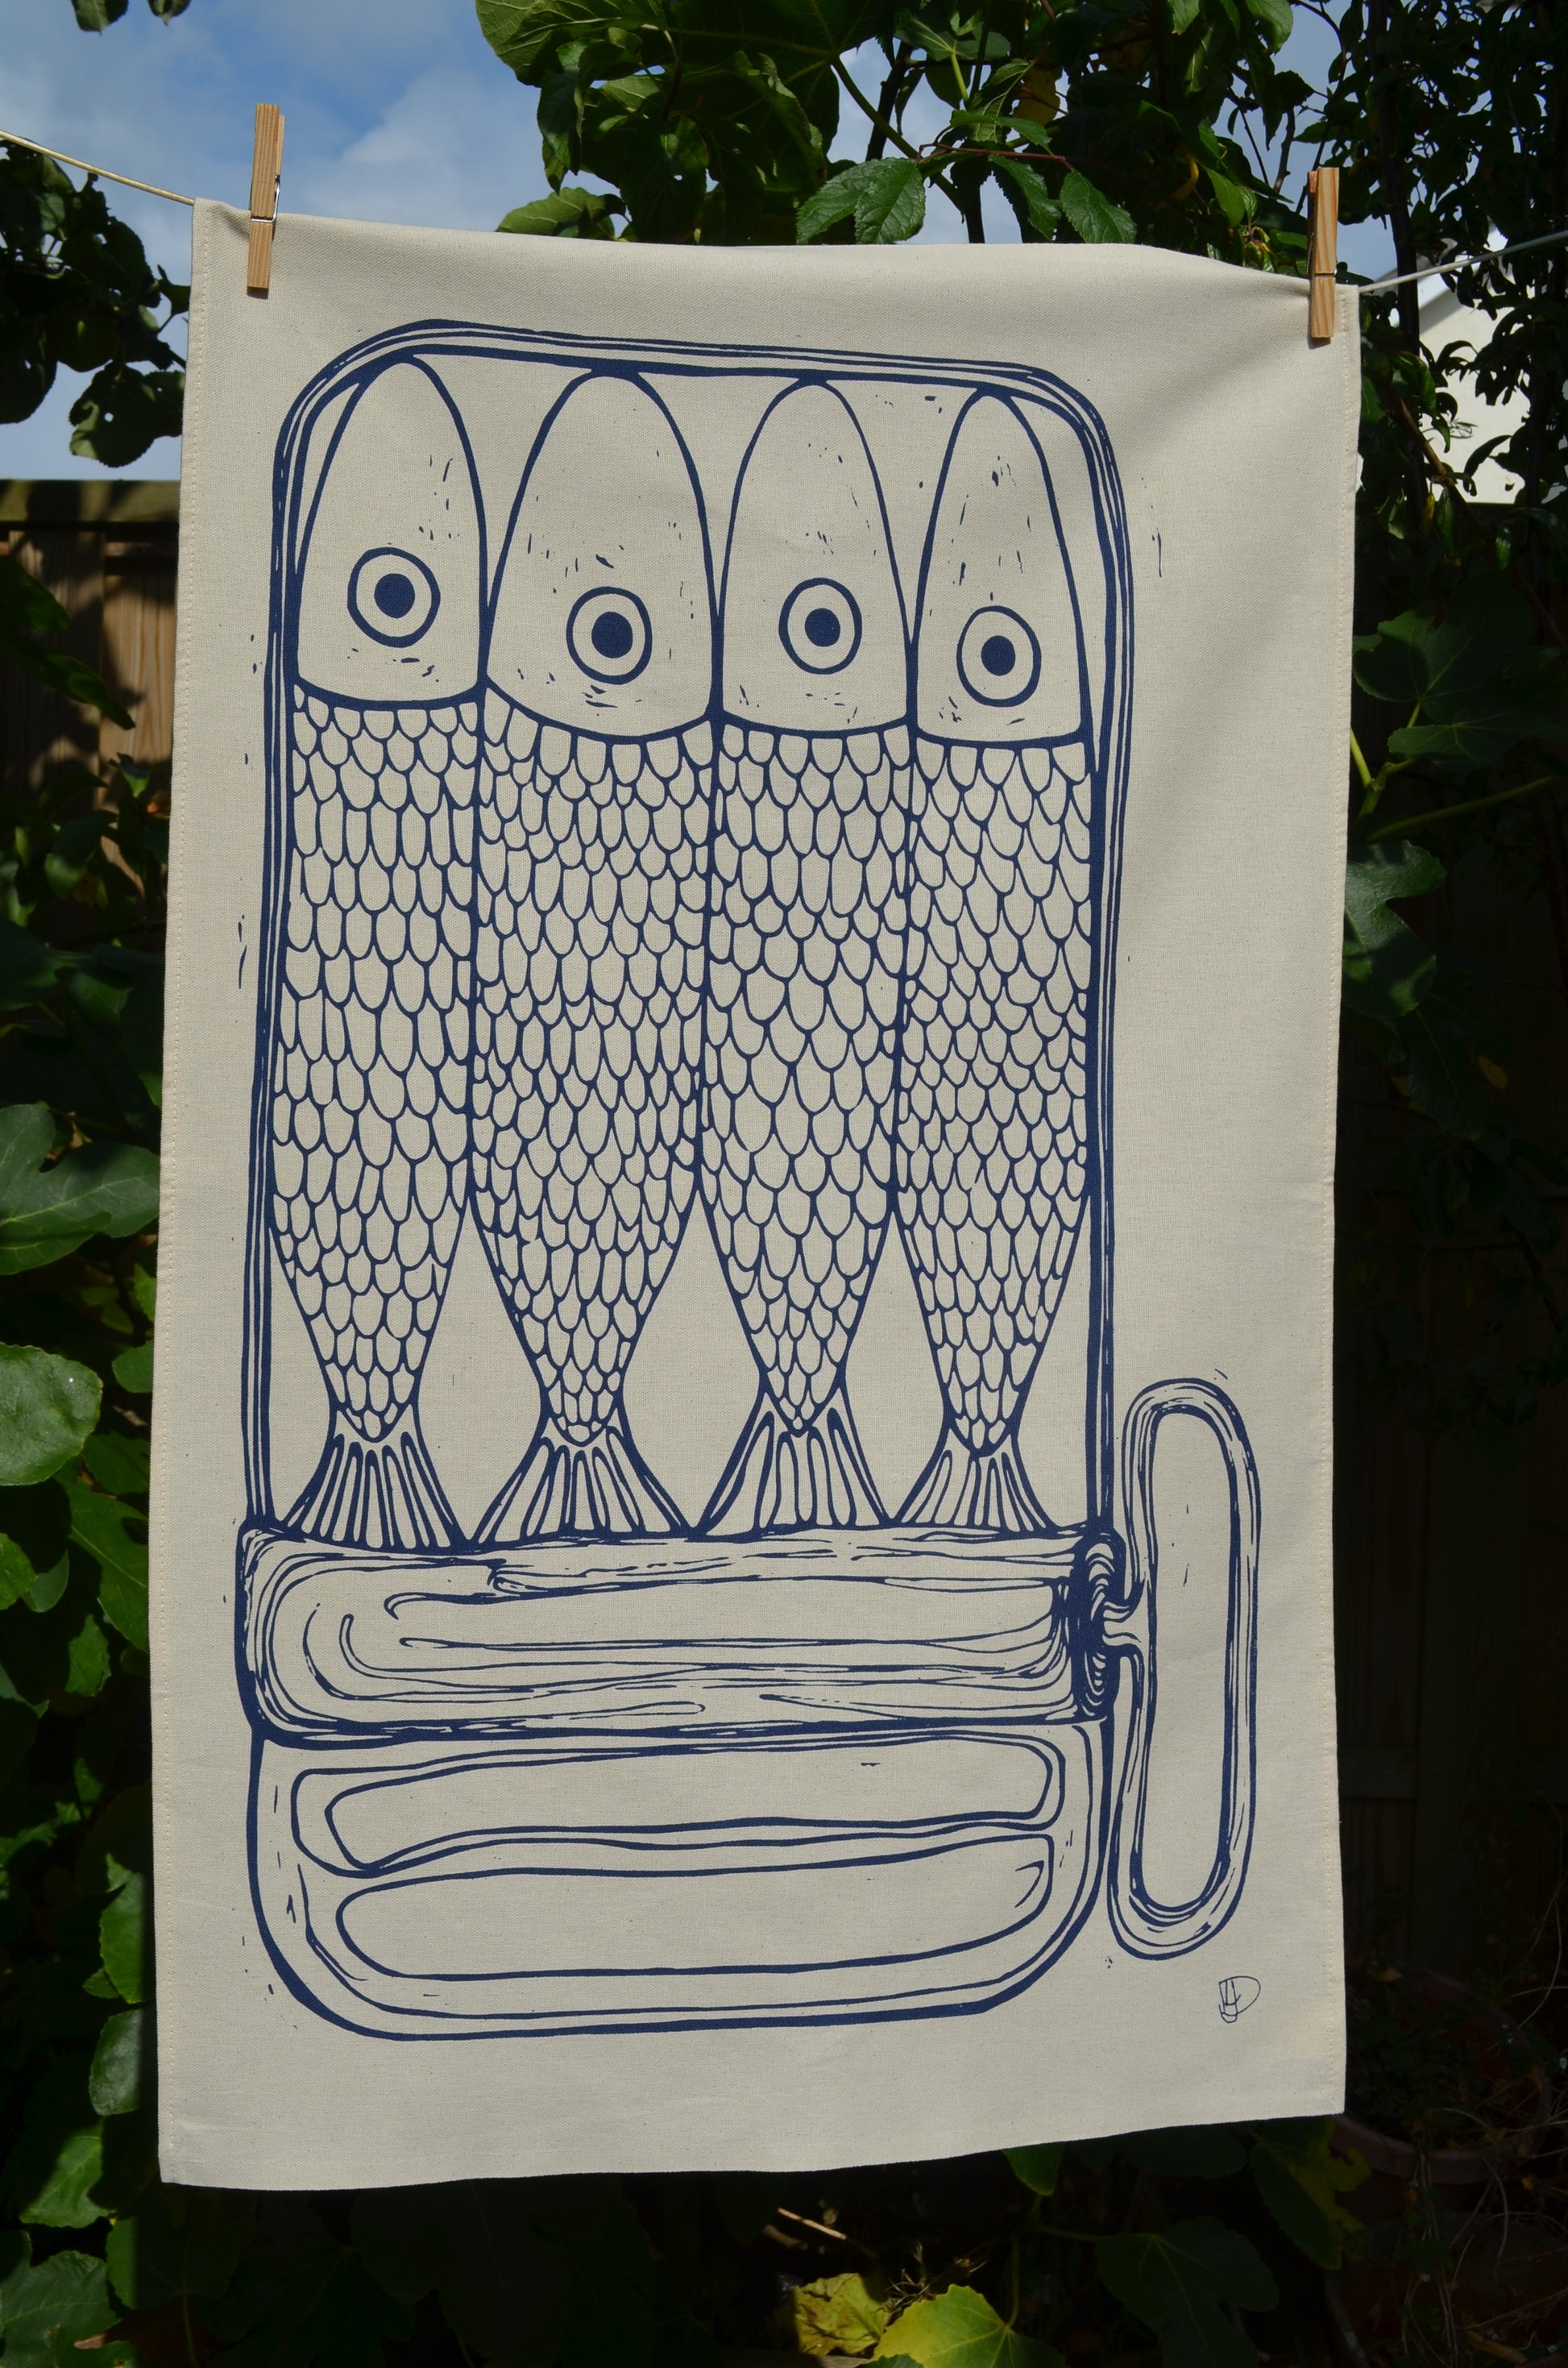 "Sardines in a Tin" full tea towel hanging in the sunshine. The design shows 4 sardines and their scales with the tin rolled down to a three quarter view so you can see the upper part of their tails.